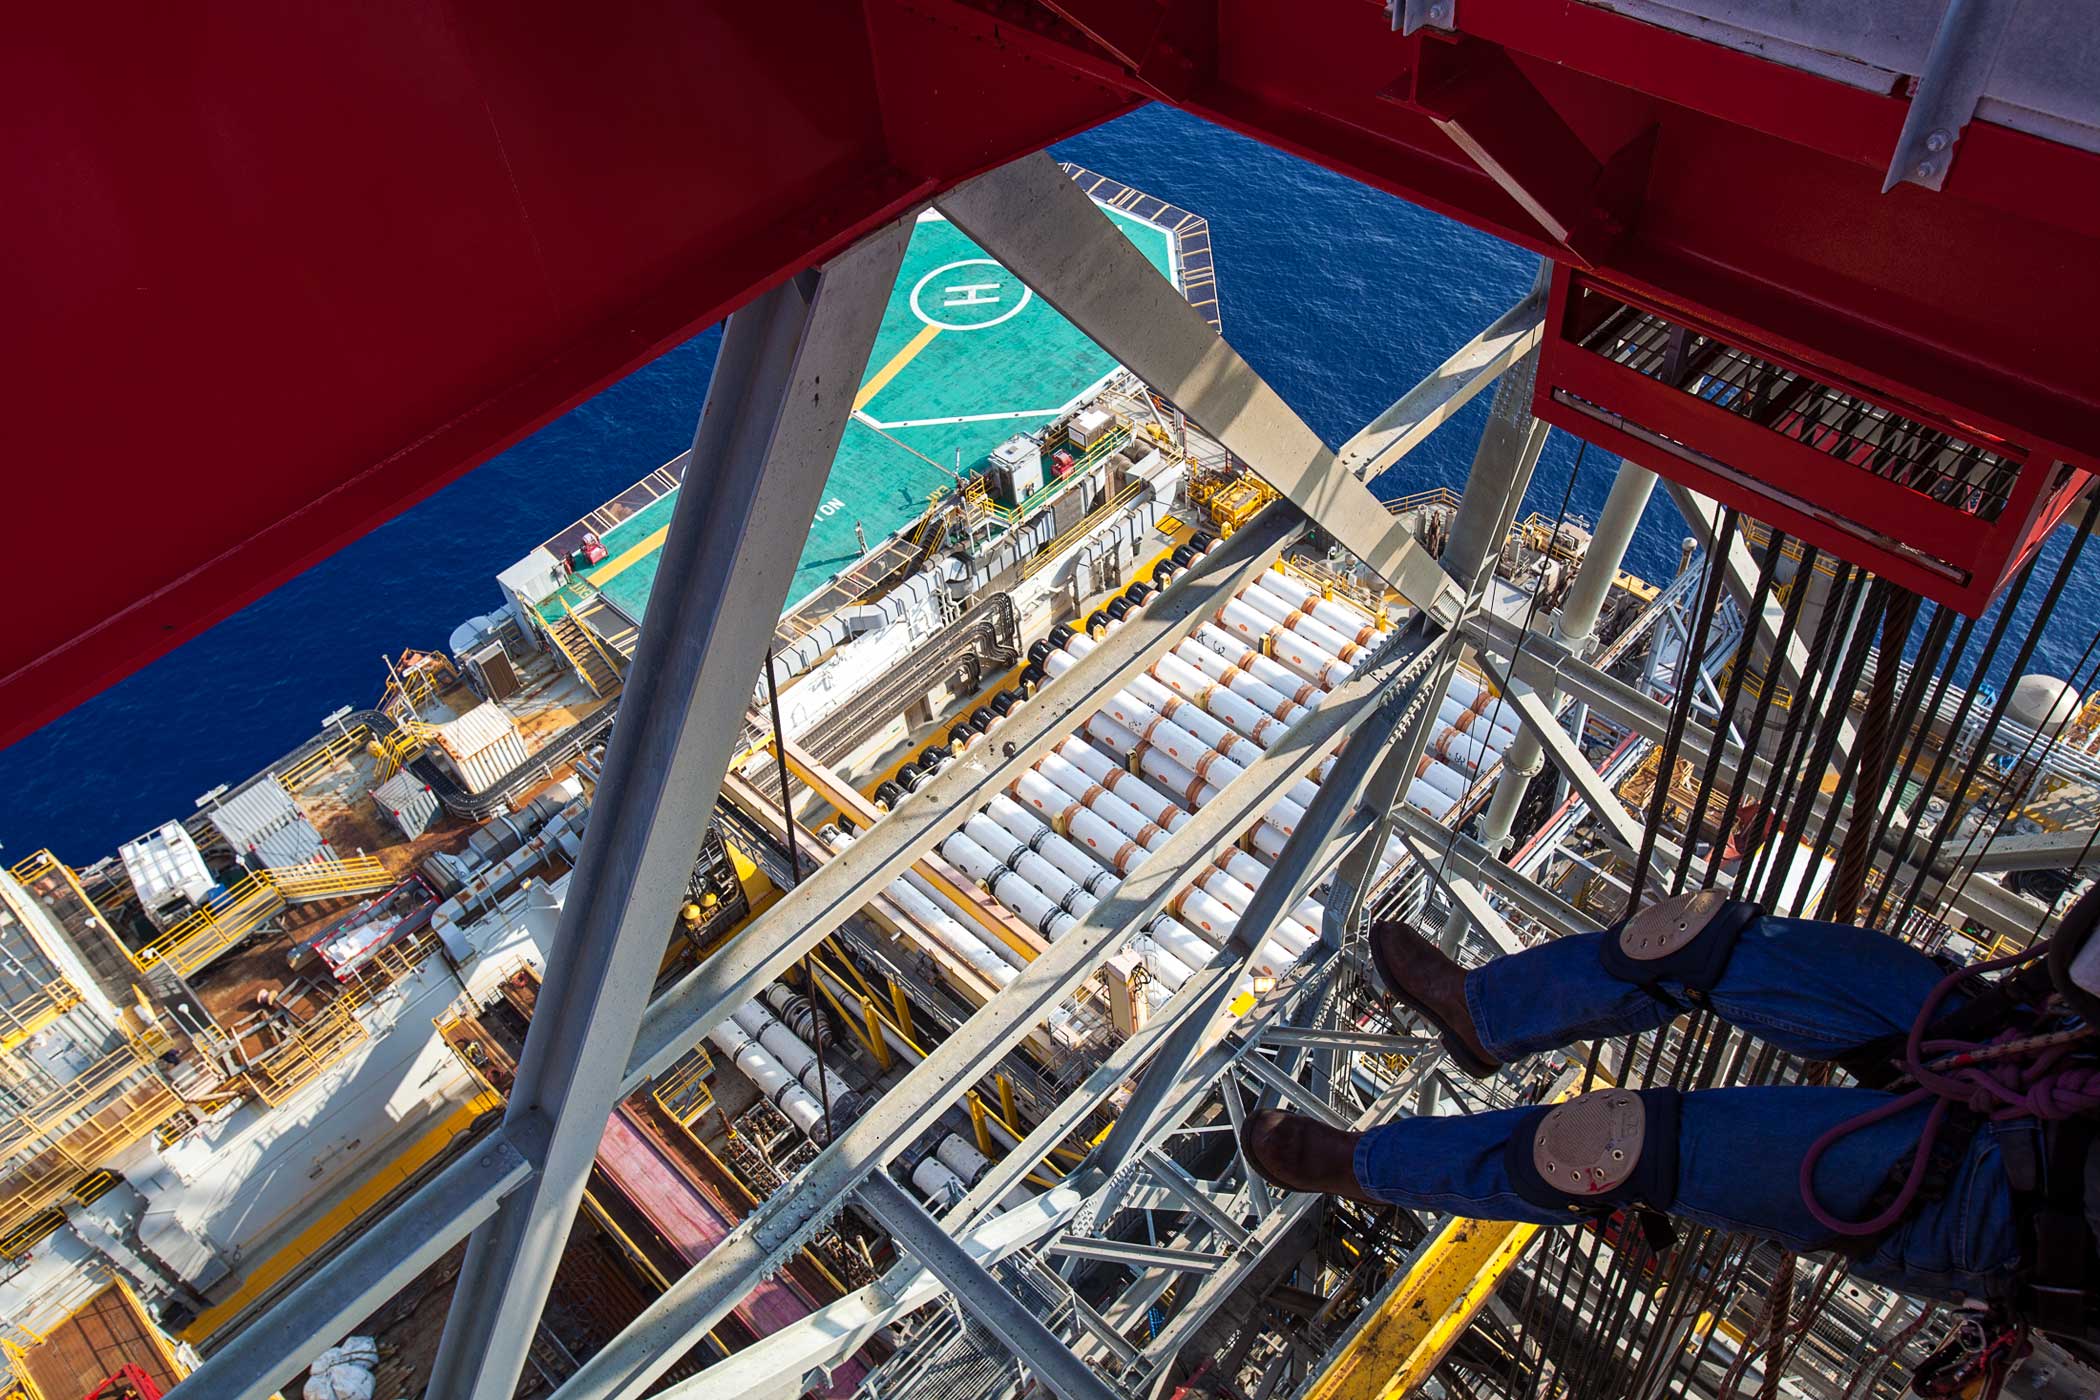 An overhead view of the legs and harness of an industrial painter suspended from the underside of an offshore rig derrick, high above the deck below.